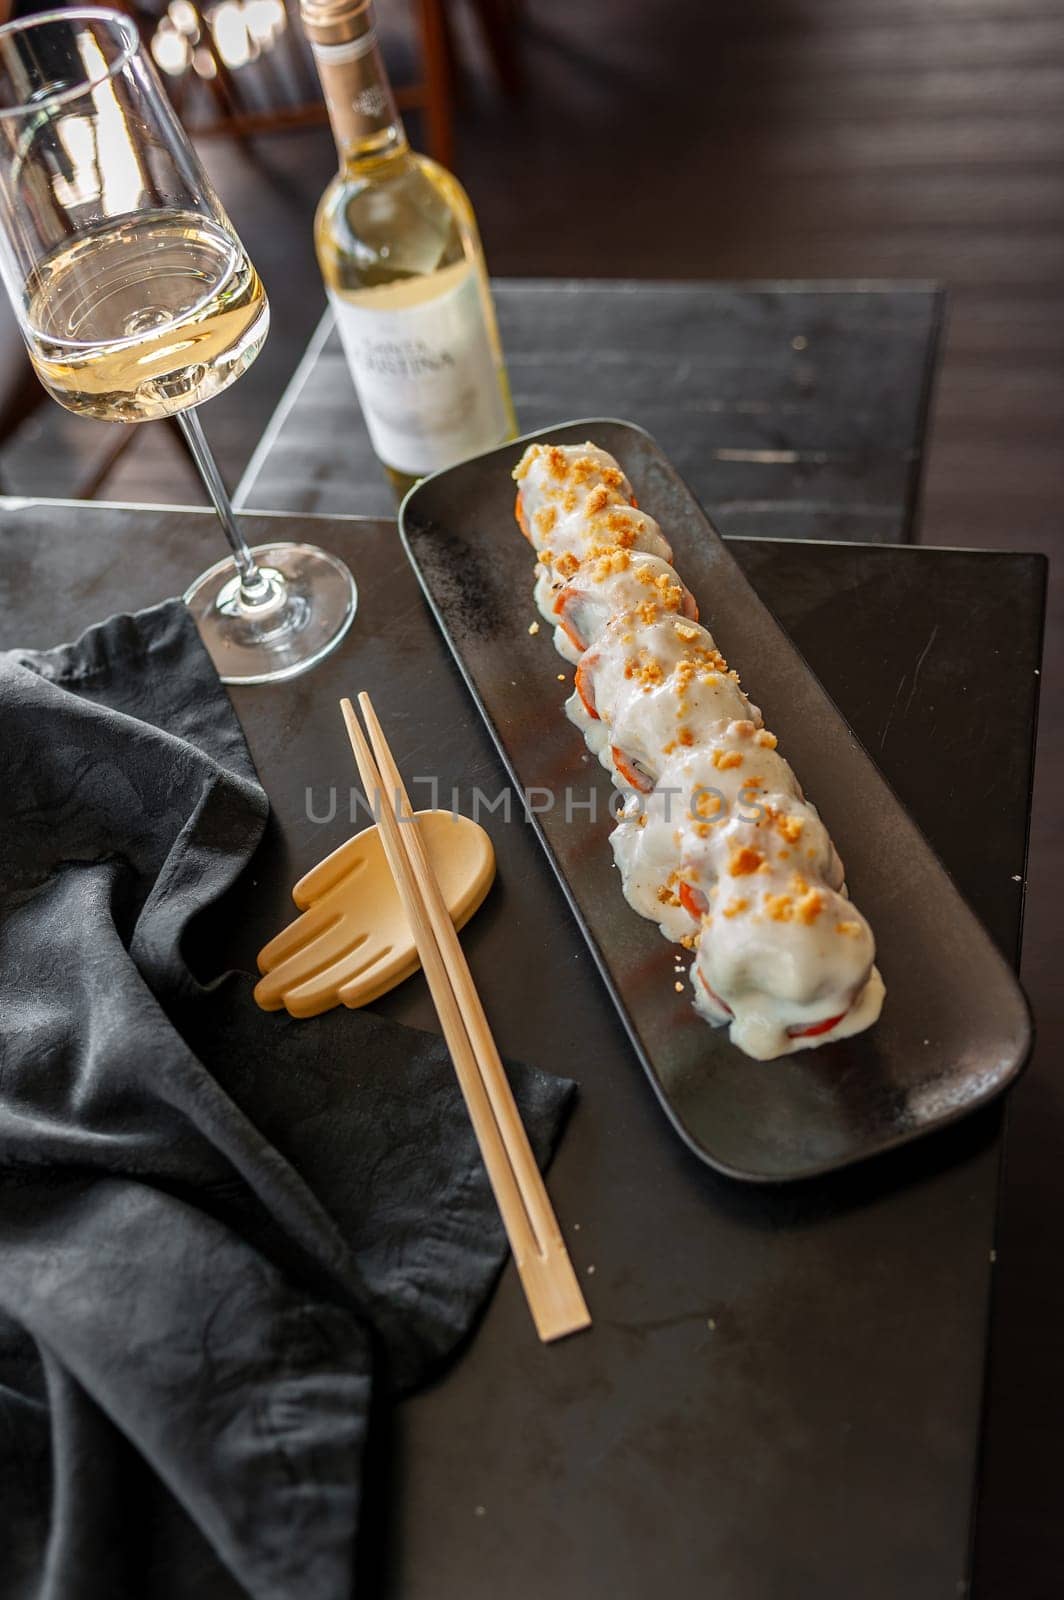 Sushi roll with salmon and vegetables in sauce on a black plate in a restaurant. High quality photo